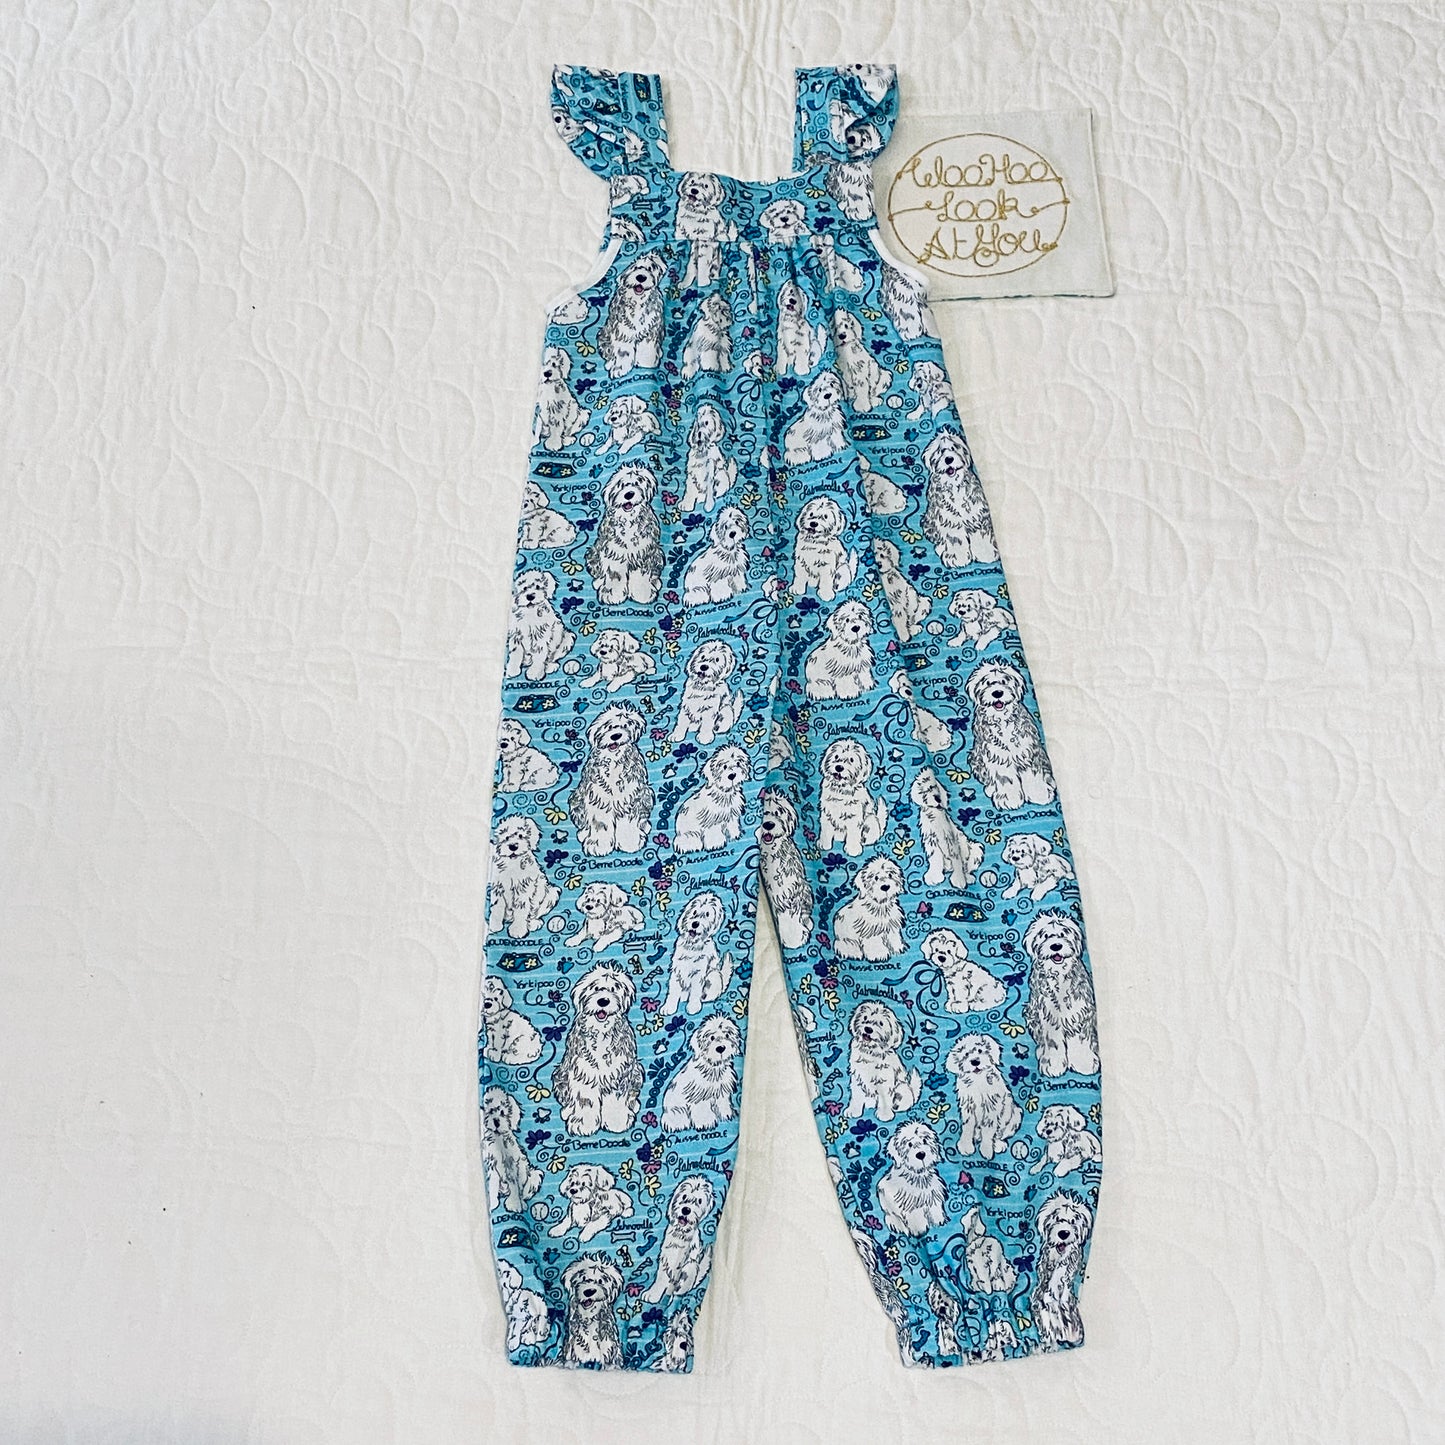 Overalls - Cute Dogs on Blue and a Pocket for Rocks